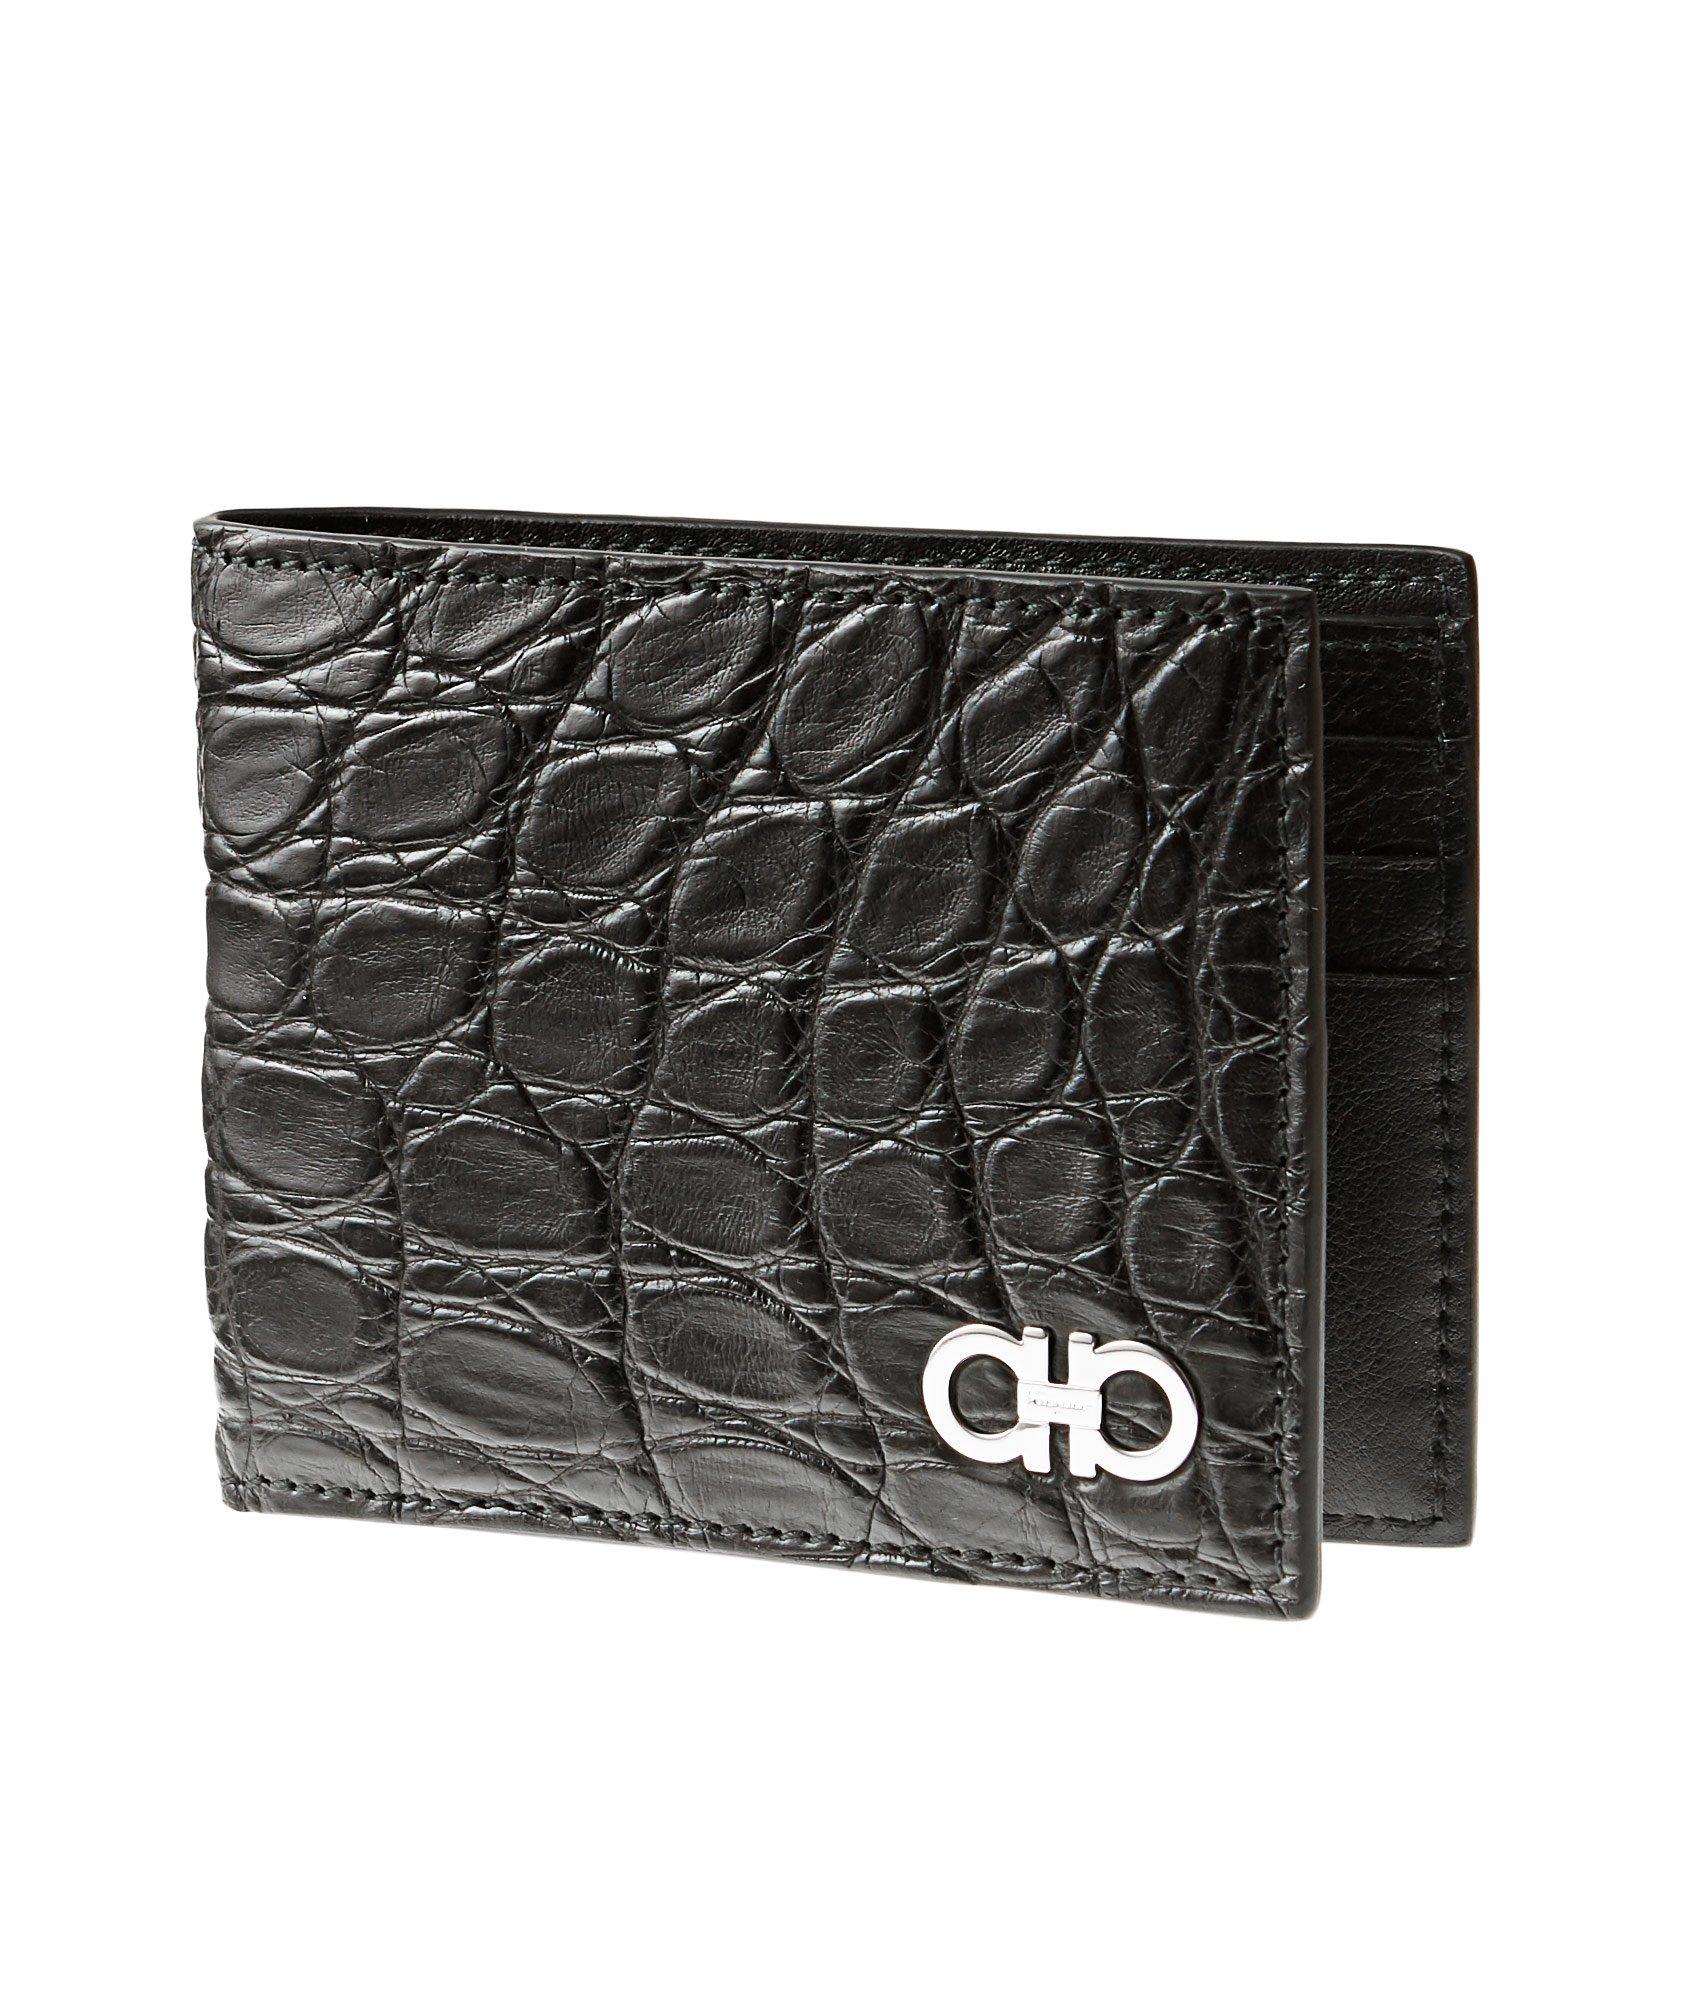 Textured Leather Wallet image 0